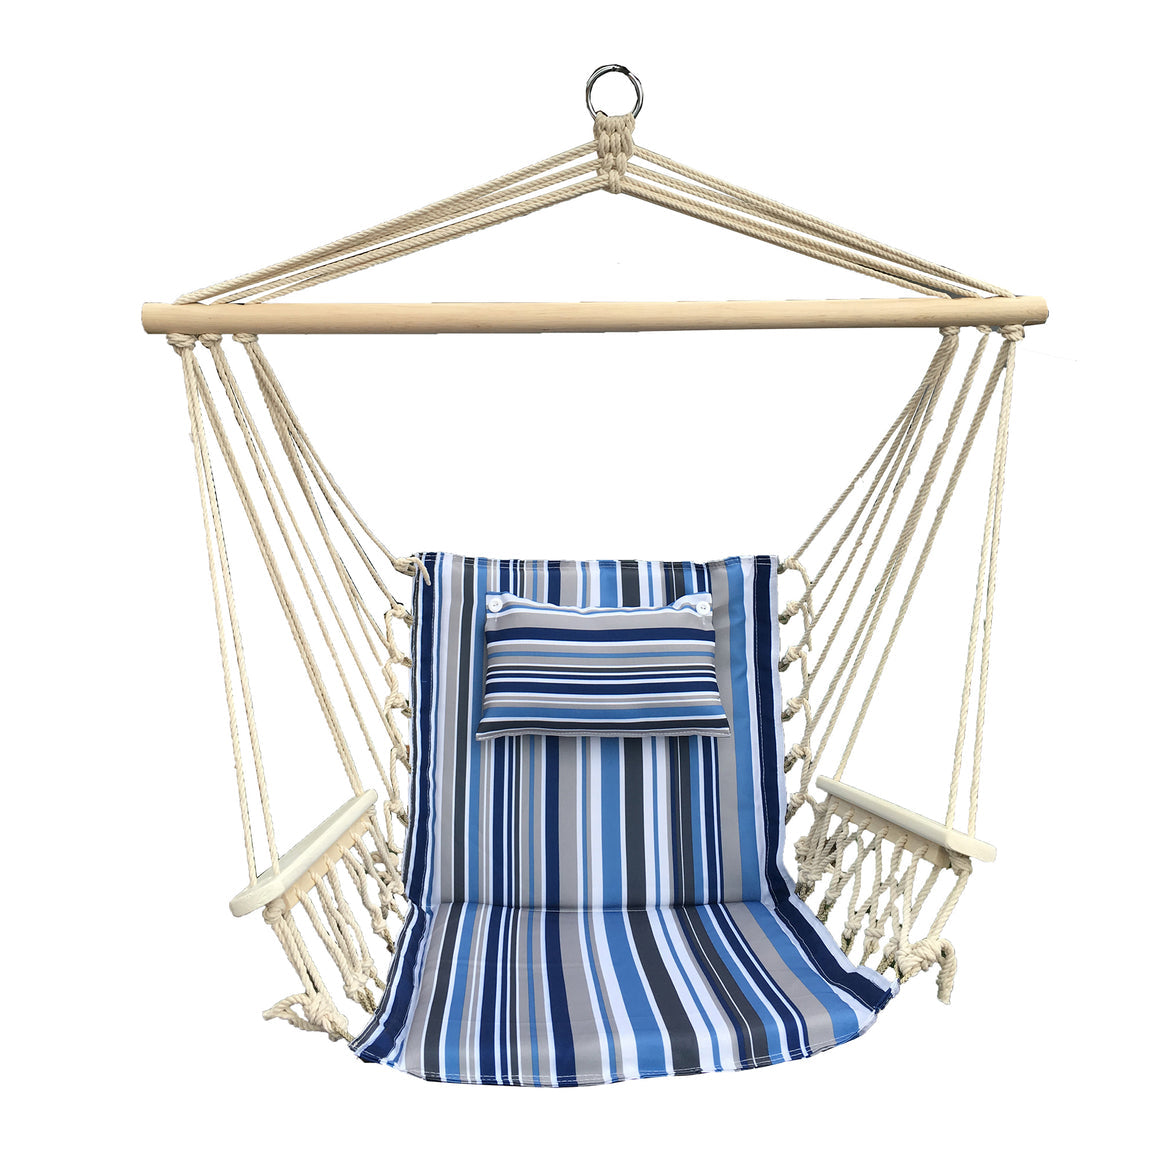 Hanging Hammock Chair By Backyard Expressions - Fade Resistant